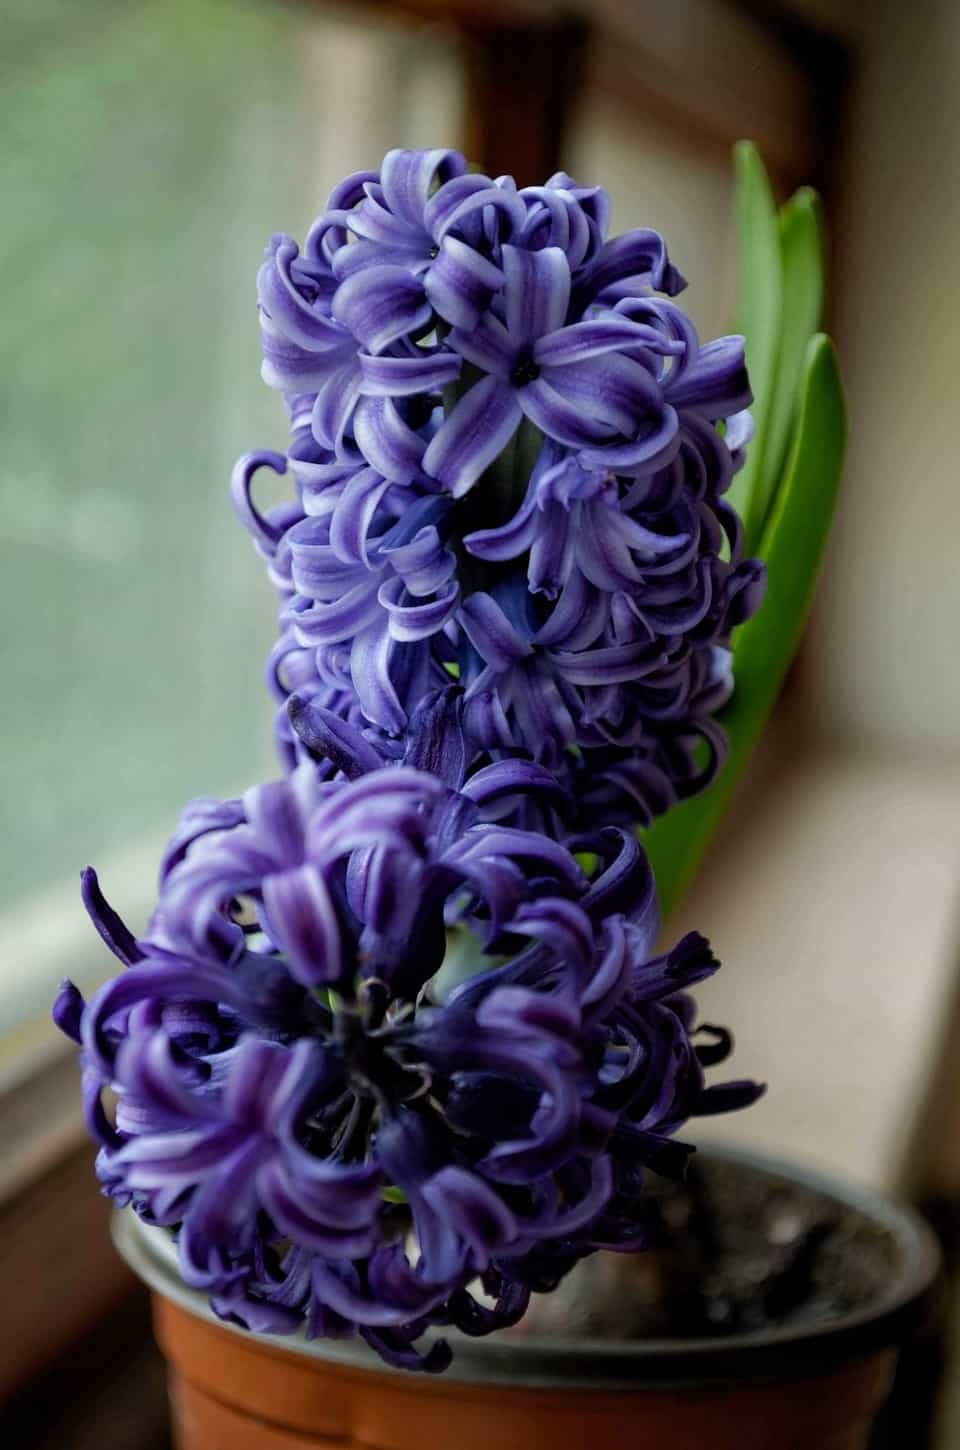 Caring for Hyacinth Indoors